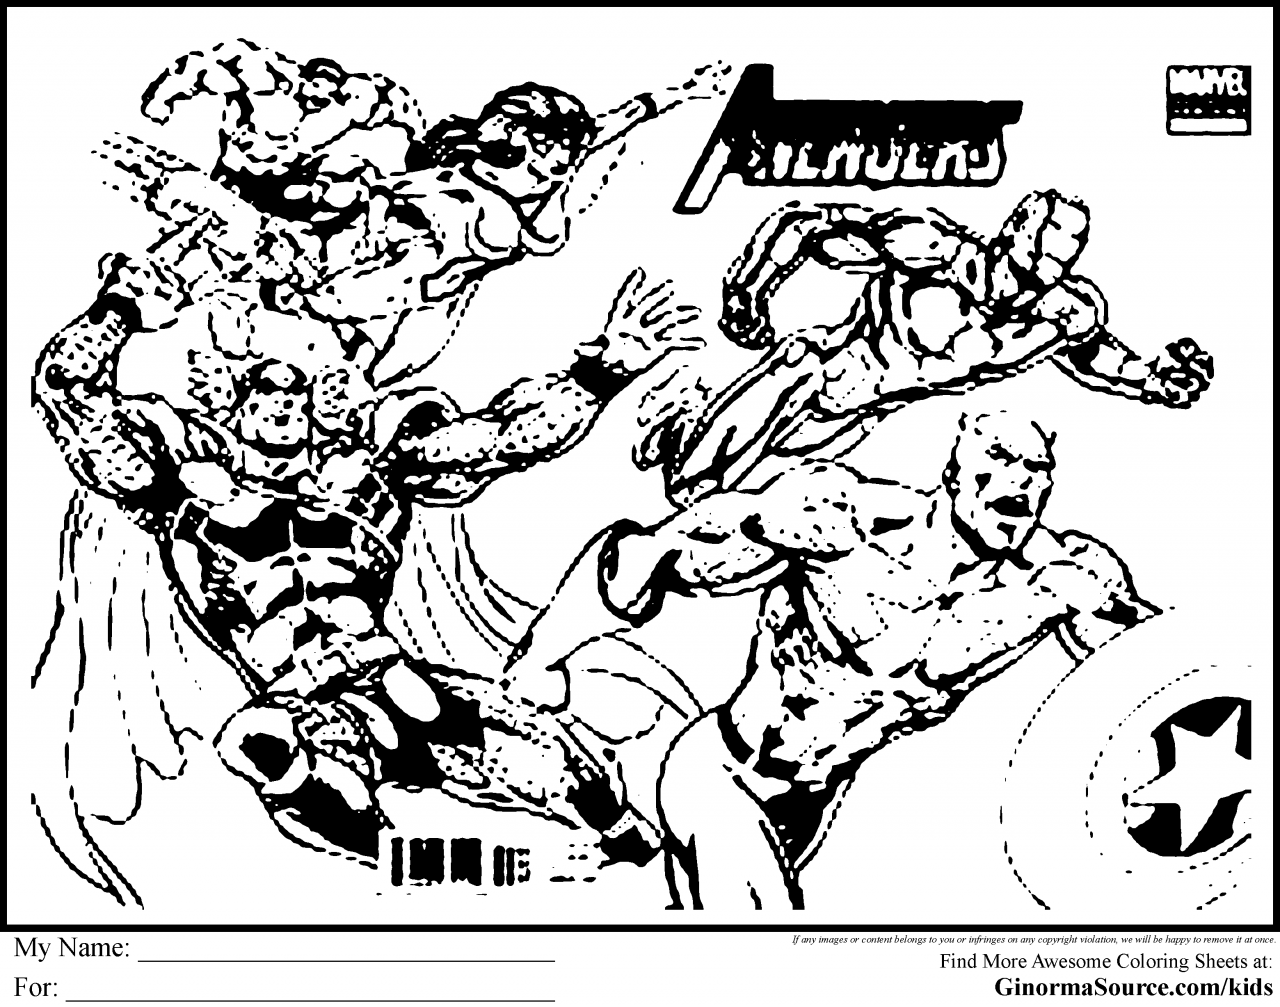 Avengers Coloring Pages Coloring Page For Kids | Kids Coloring